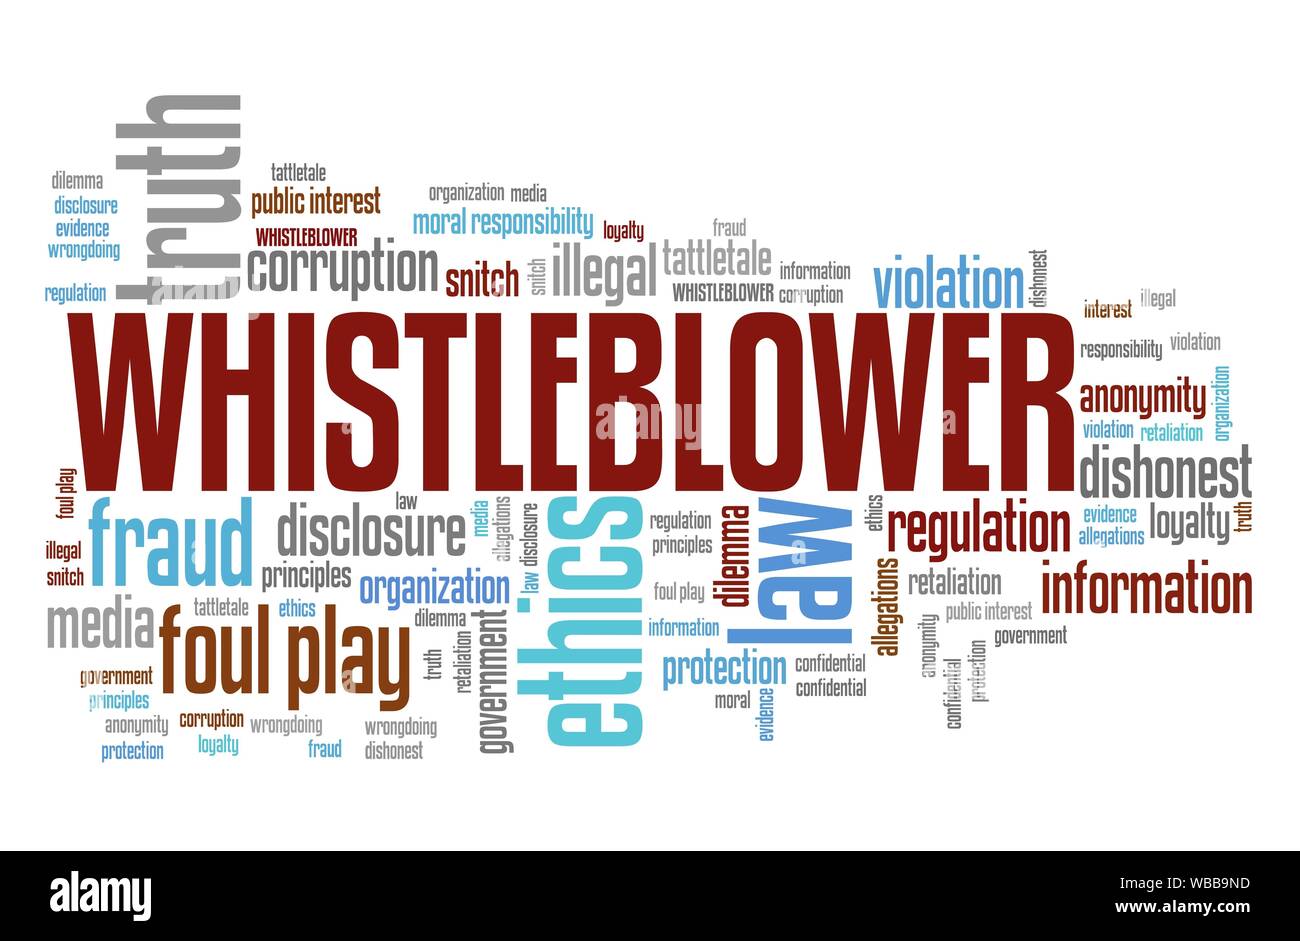 Whistleblower - company law violation. Moral responsibility concept word cloud. Stock Photo